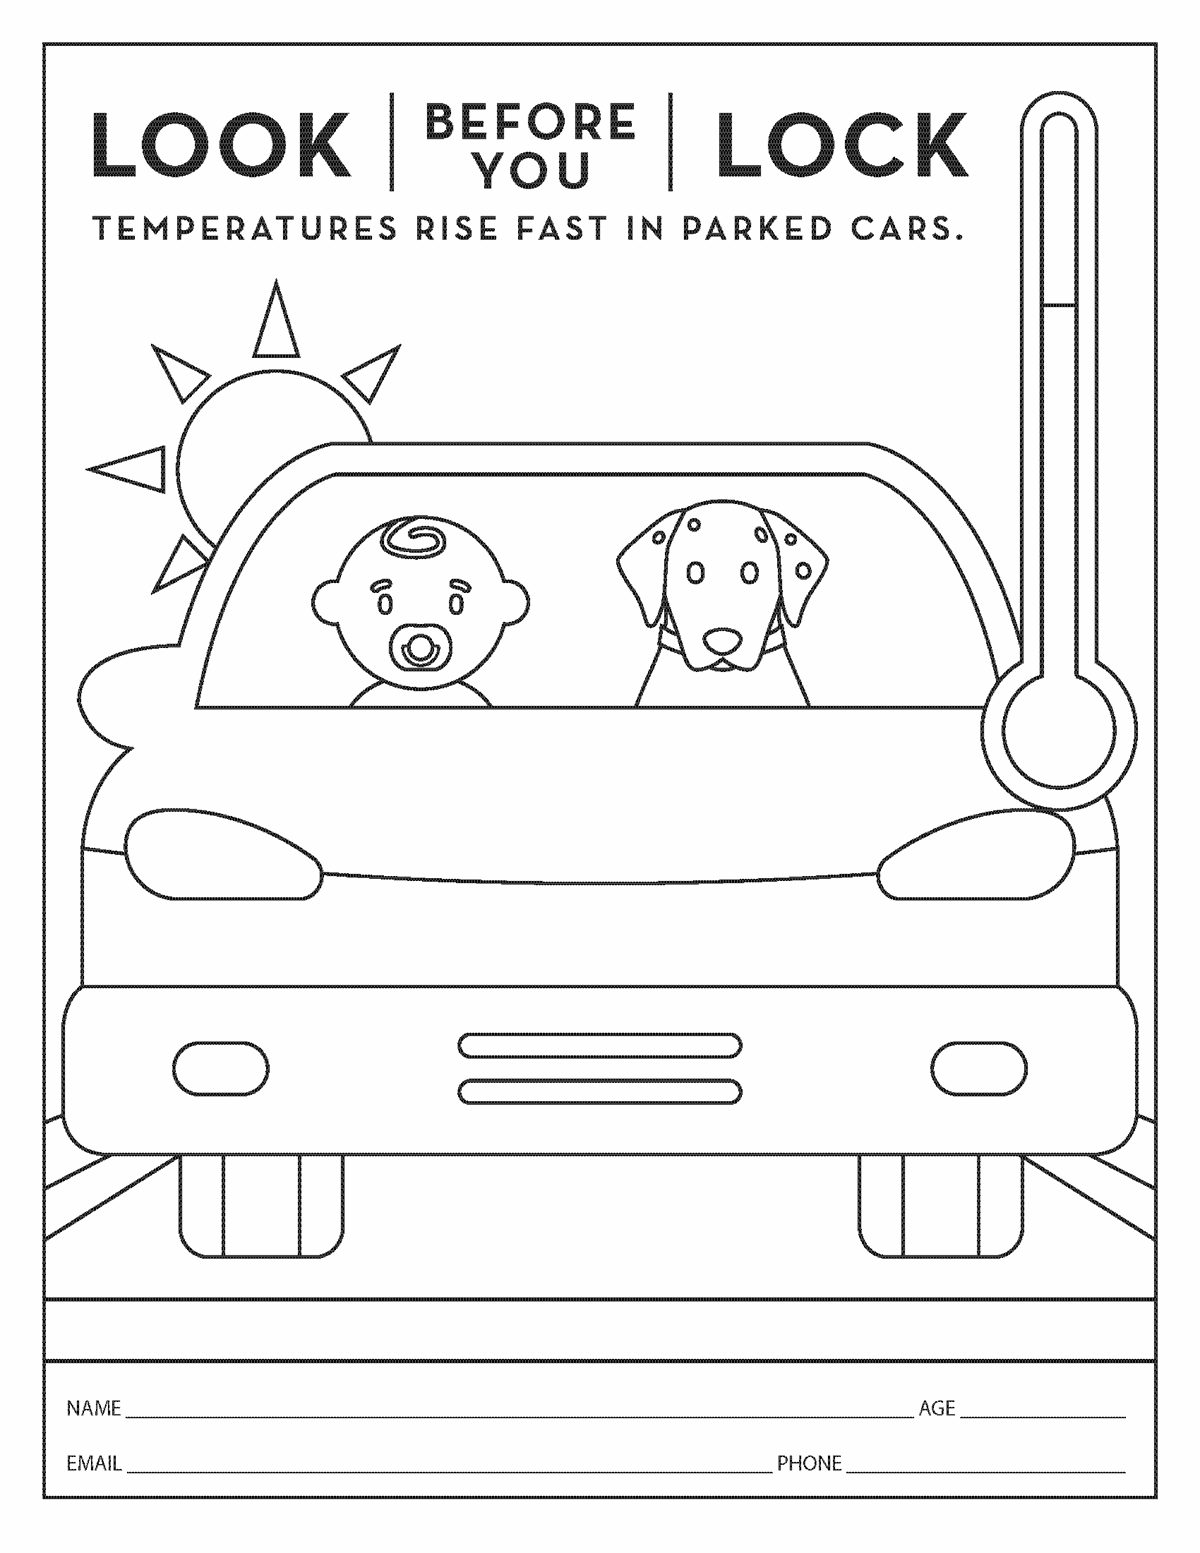 Look Before You Lock Coloring Page